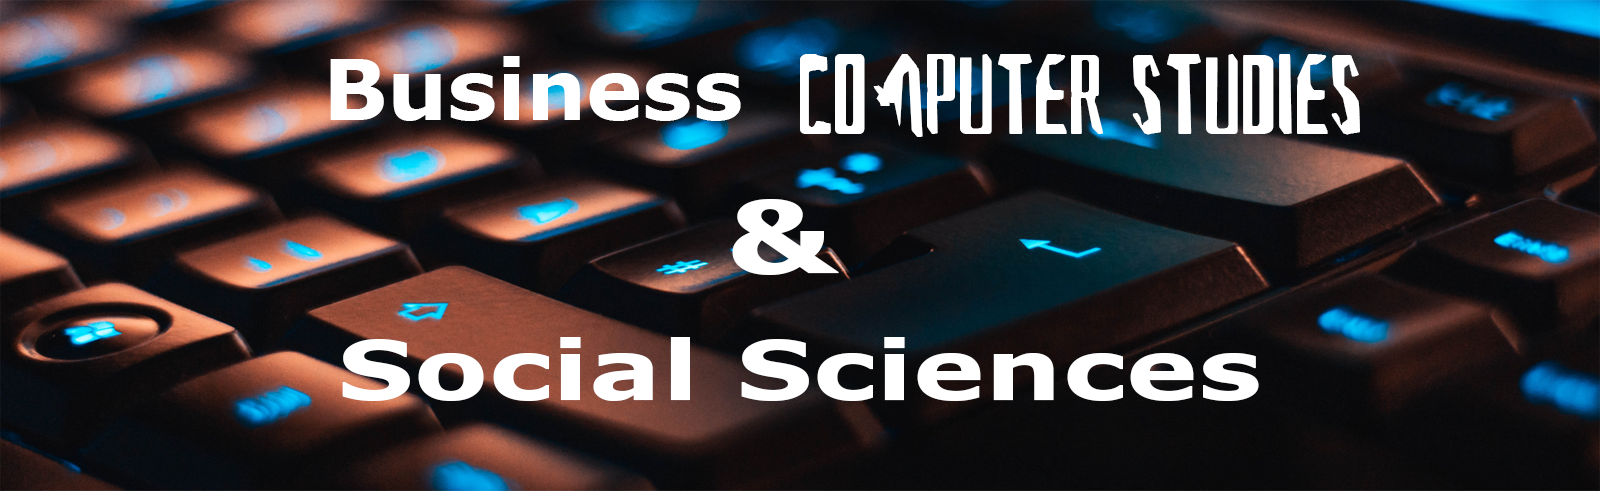 Business Computer Studies and Social Sciences